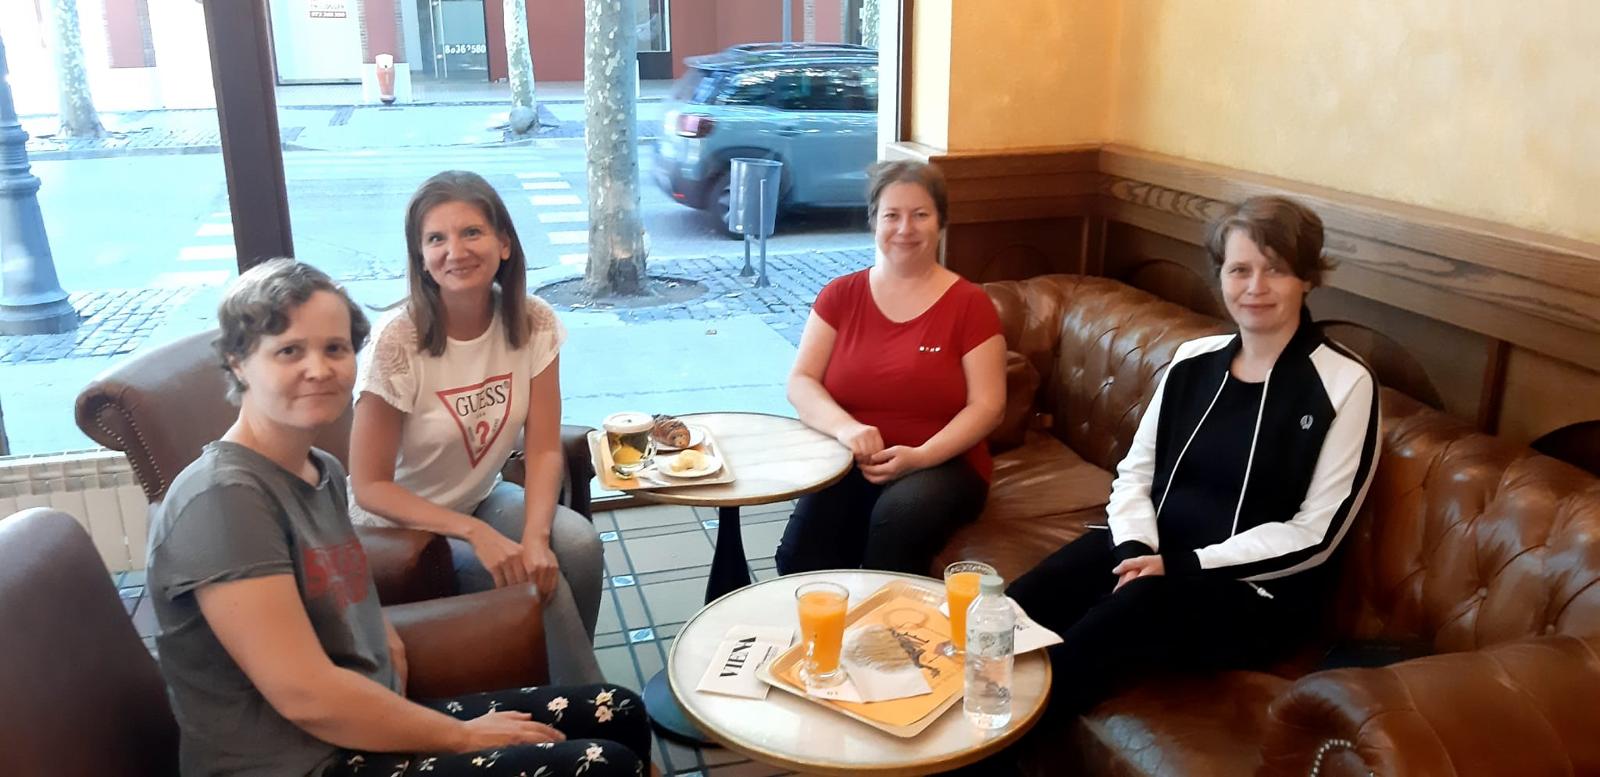 Anna-Maria Kursawe meets with students from Interlingua in Olot